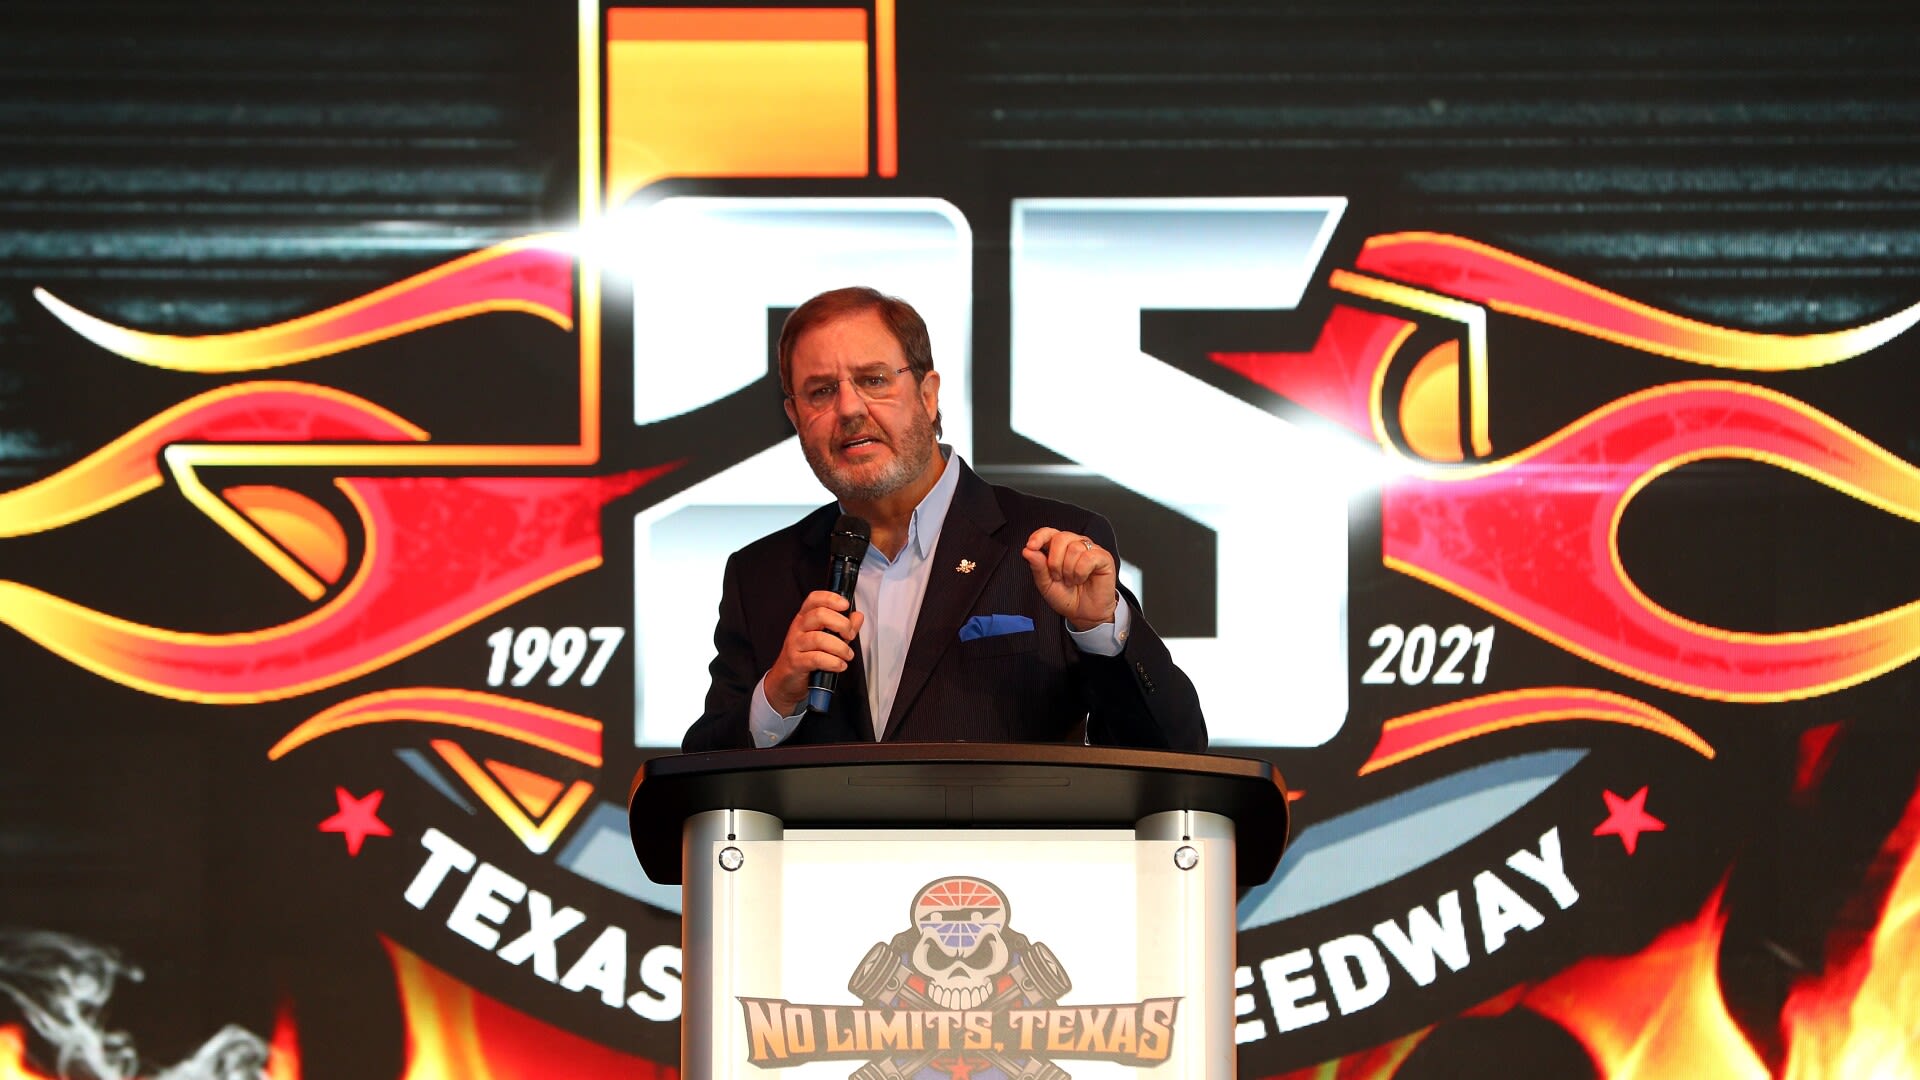 Remembering Eddie Gossage, who gave us 'Shut Up and Drive' while spreading the racing gospel